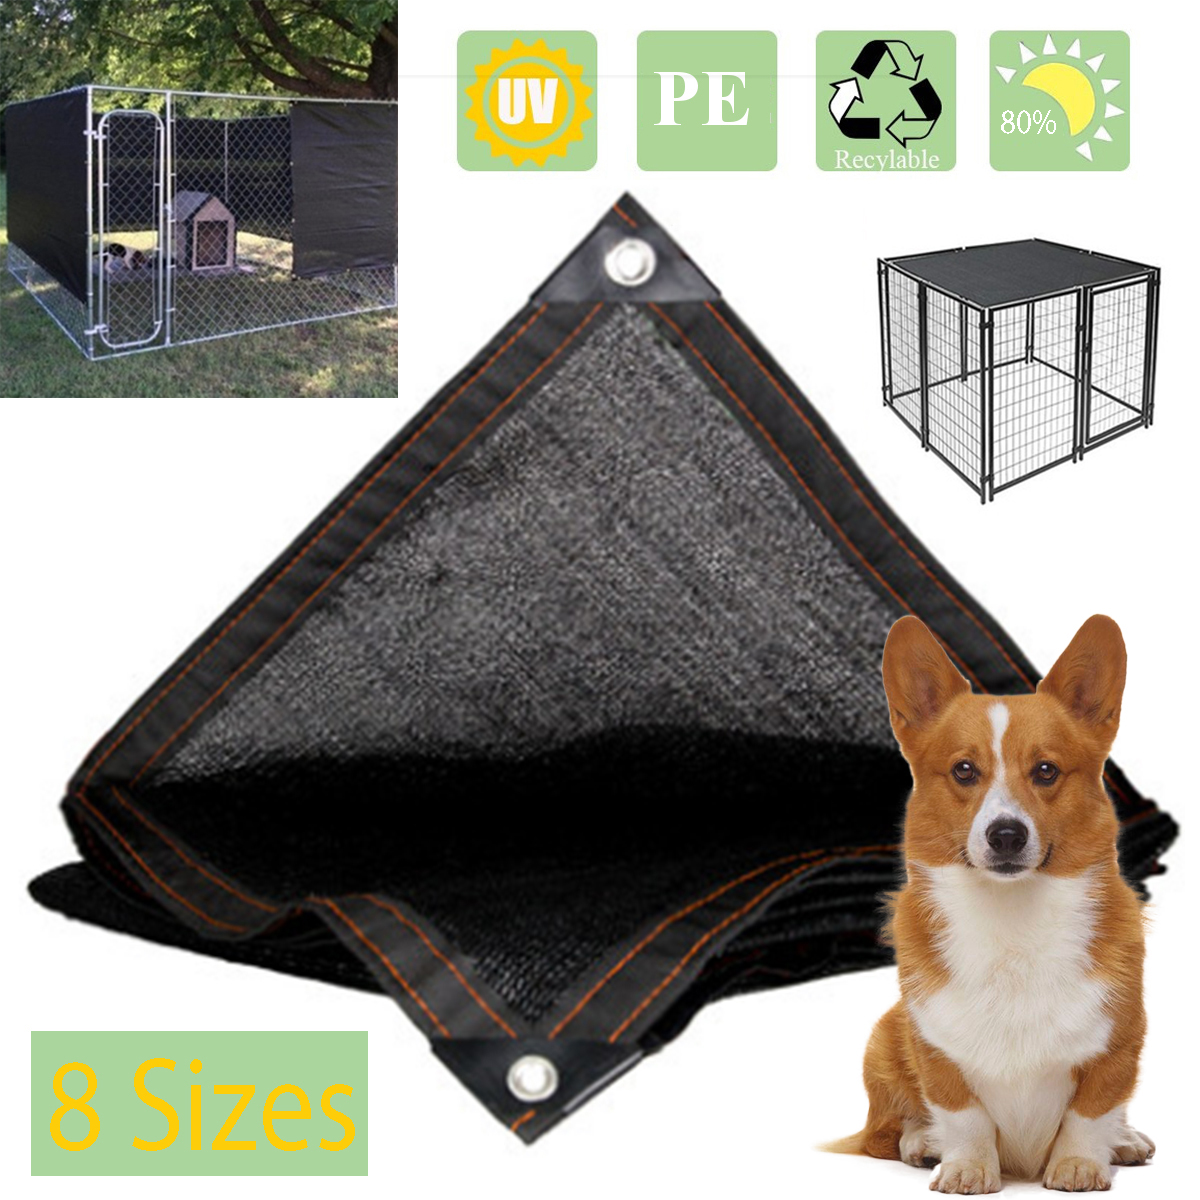 Sunshade-Net-Dog-Kennel-Puppy-Cat-Rabbit-Pet-Shade-Crate-Cover-Cage-Home-80-Sunblock-Shade-1614652-3